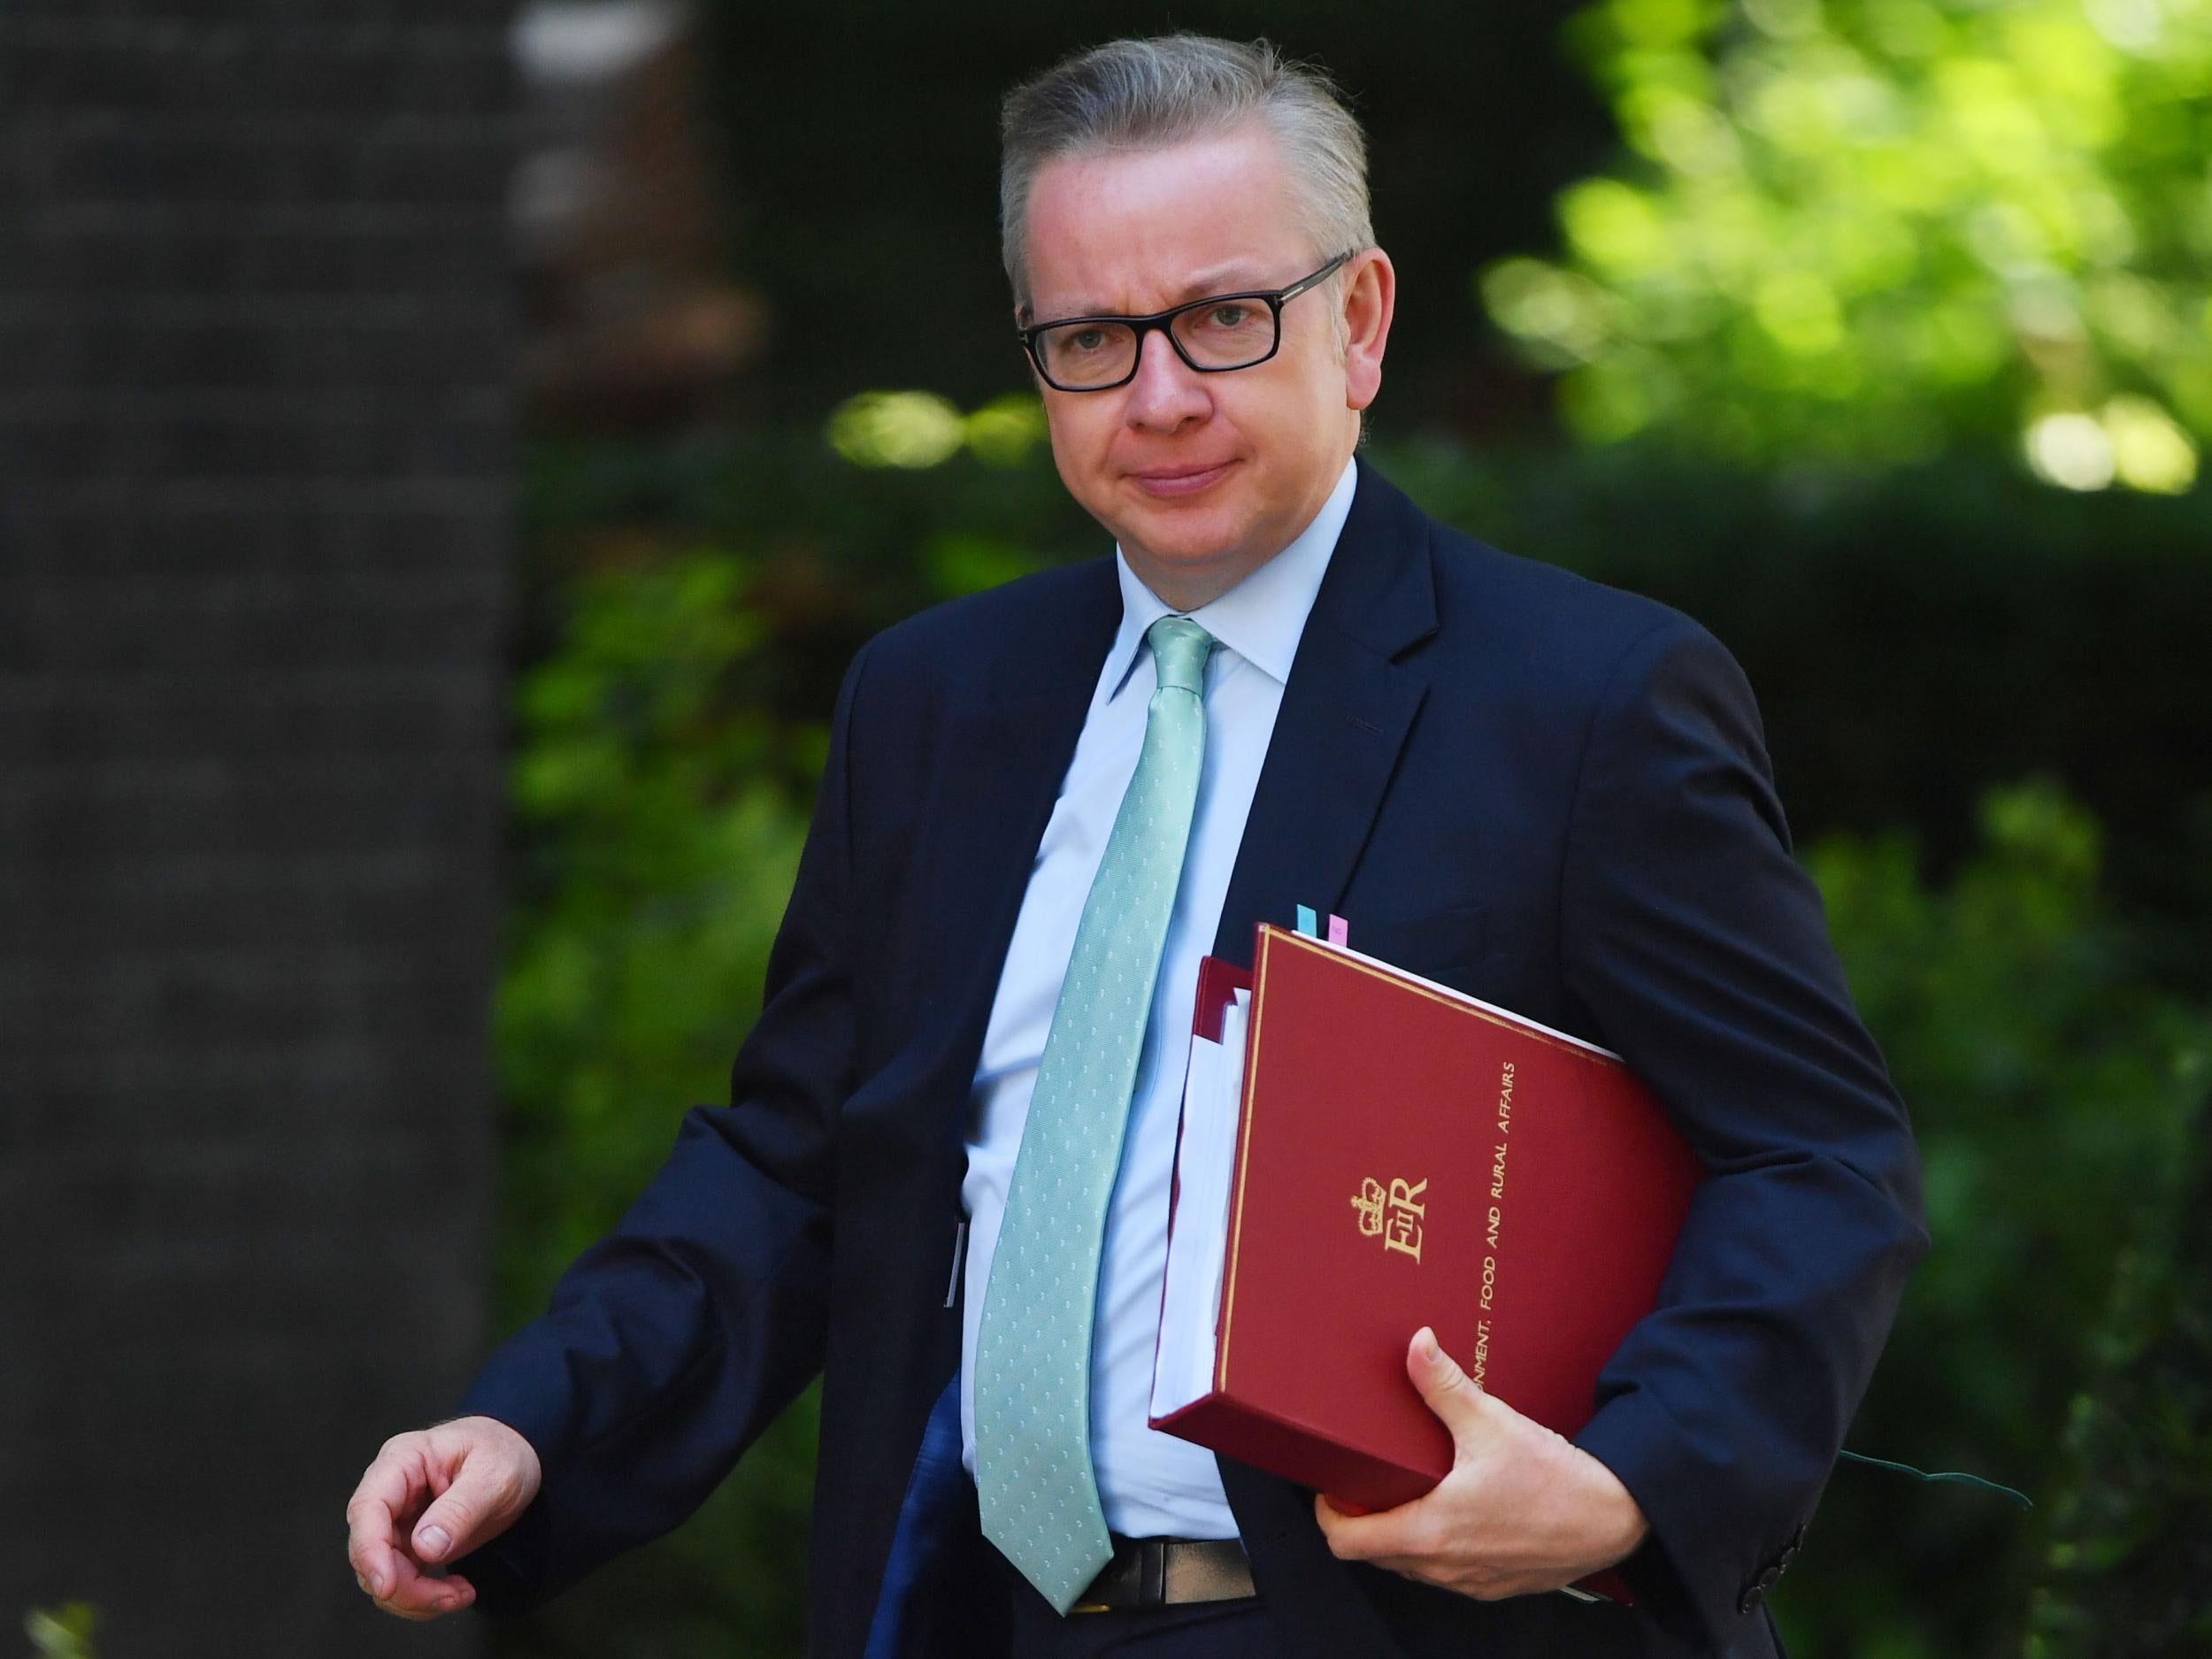 Gove says Britain shall remain ‘a leader in environmental standards’